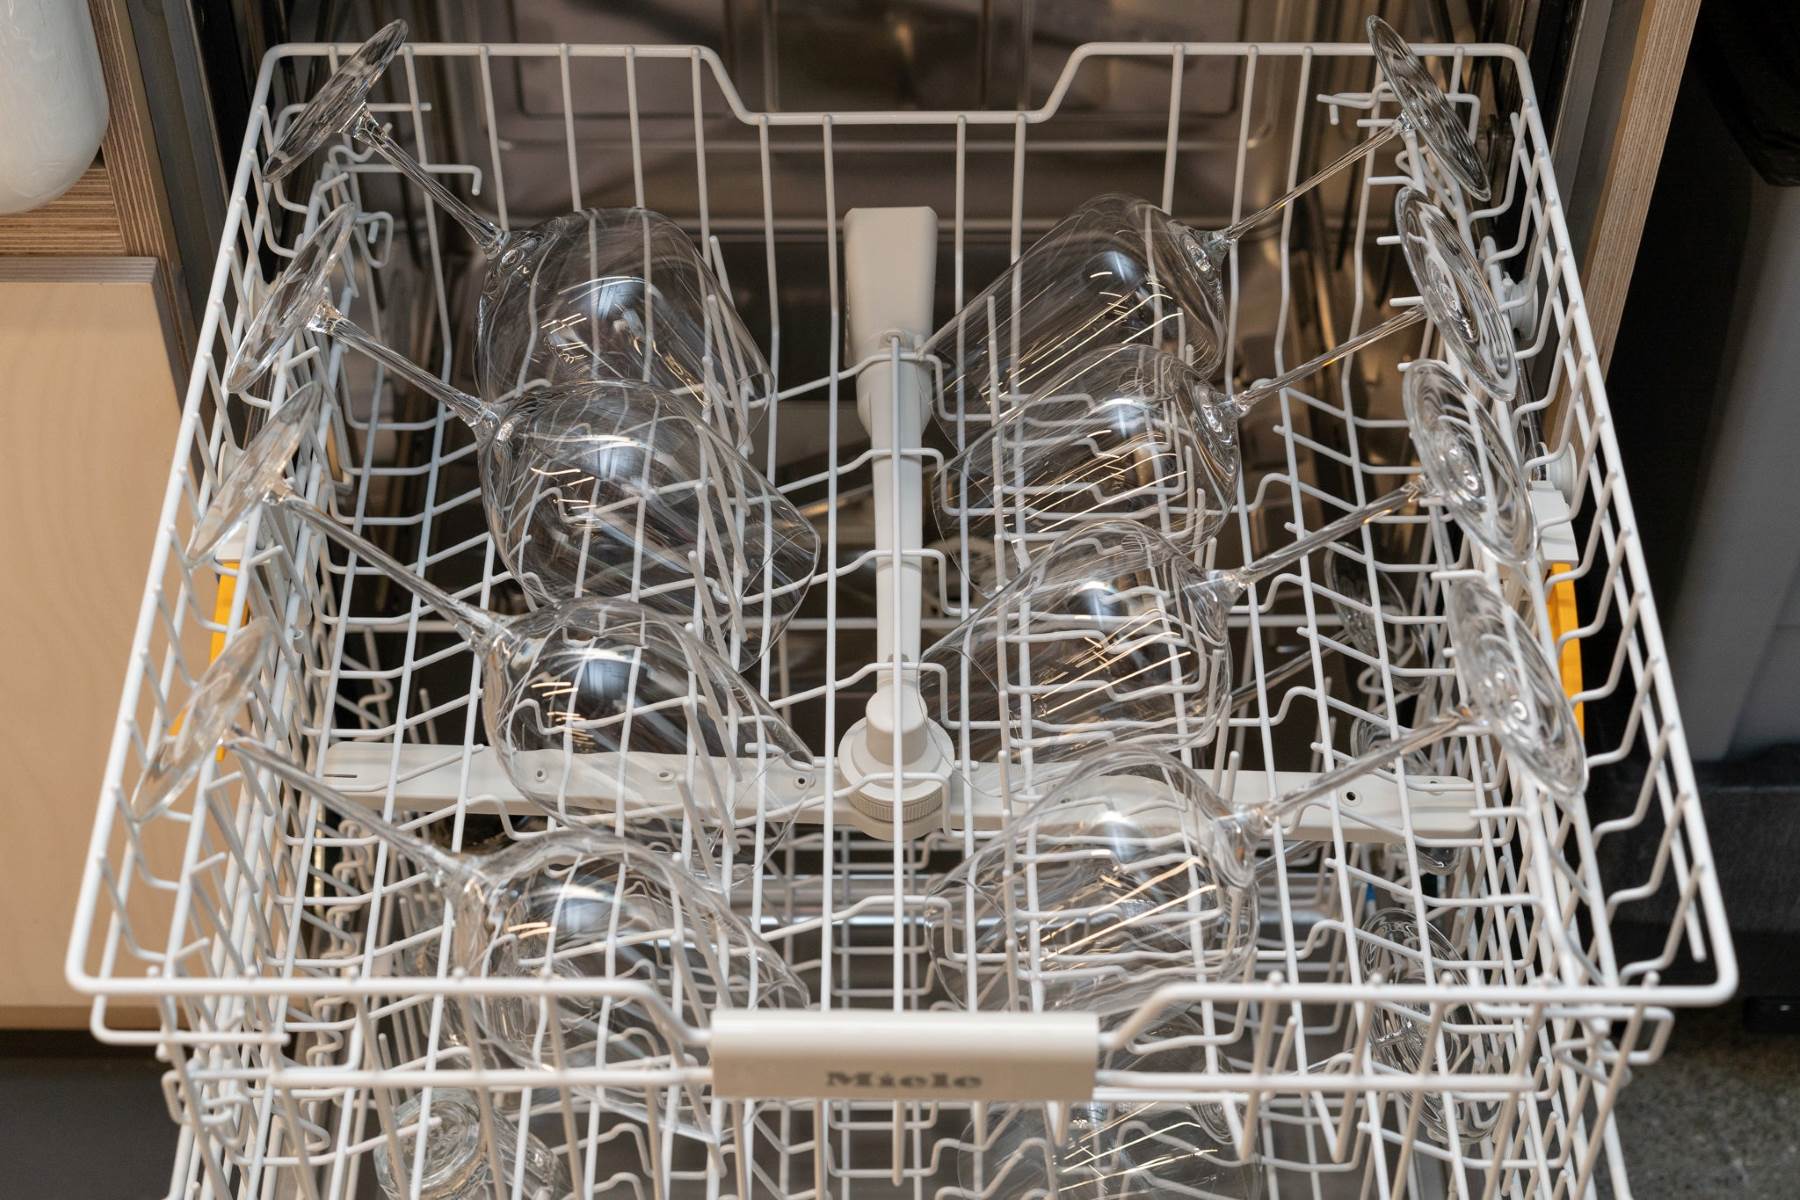 How To Put Wine Glass In Dishwasher